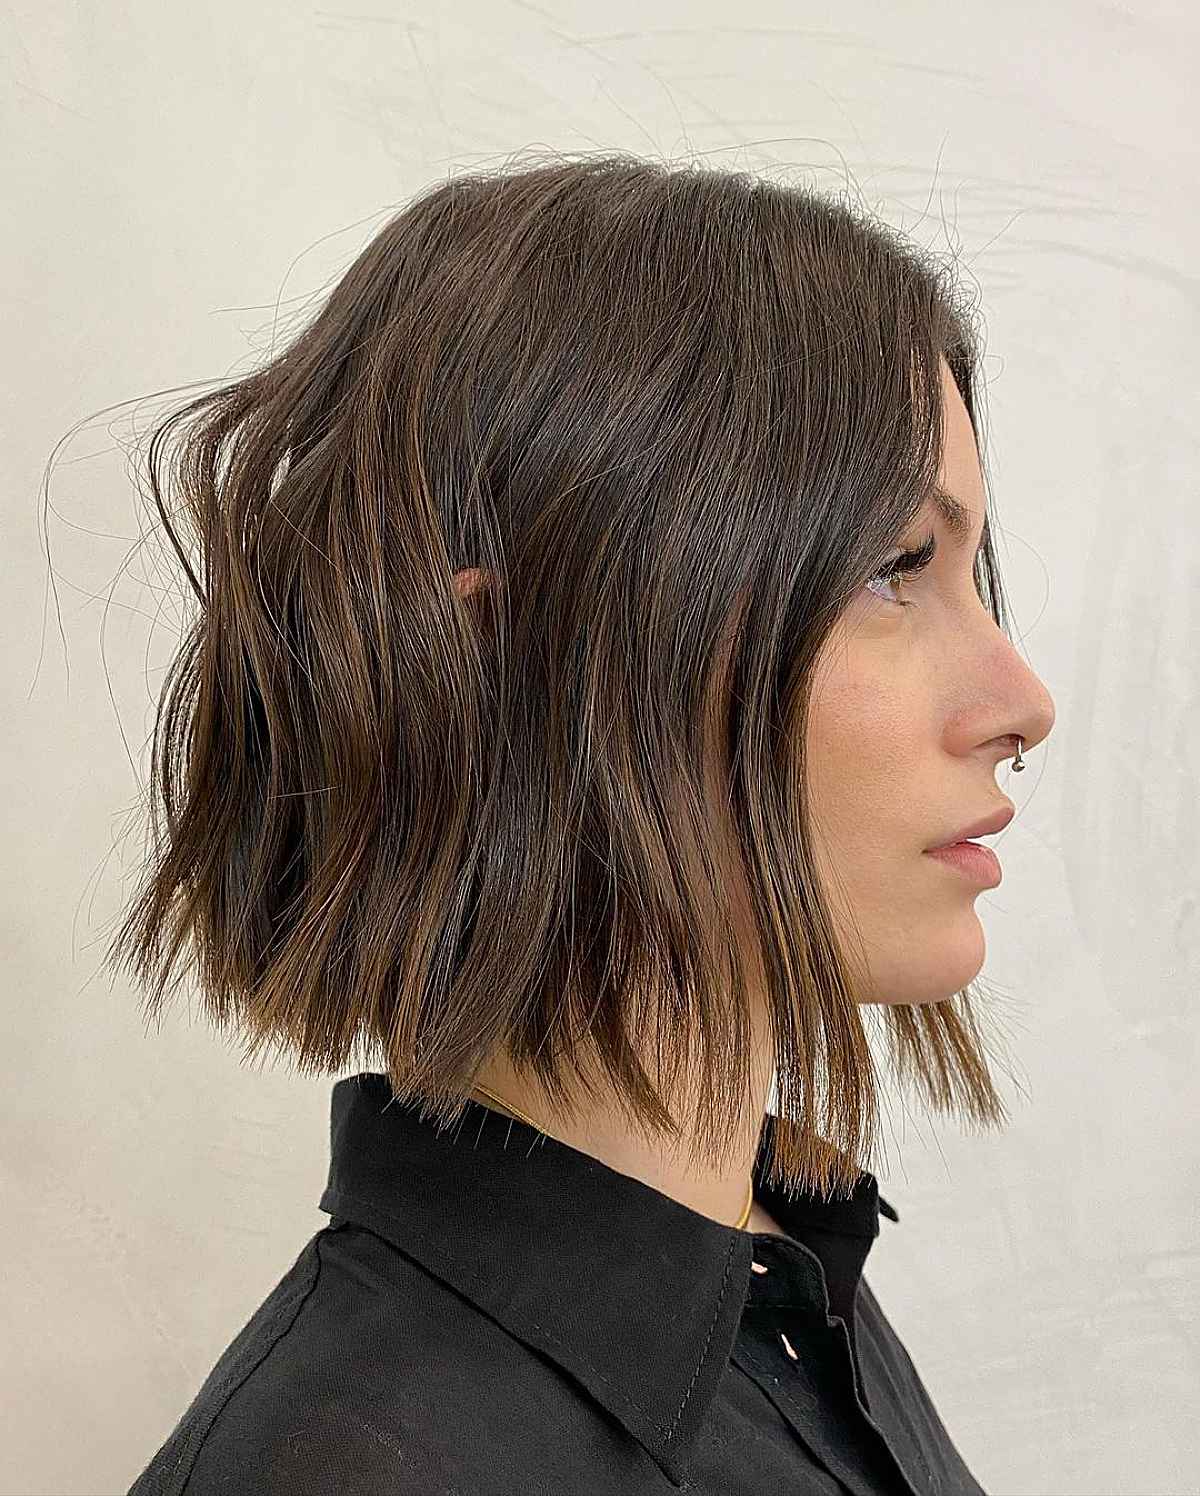 Neck-Length Blunt Cut for Thin Hair